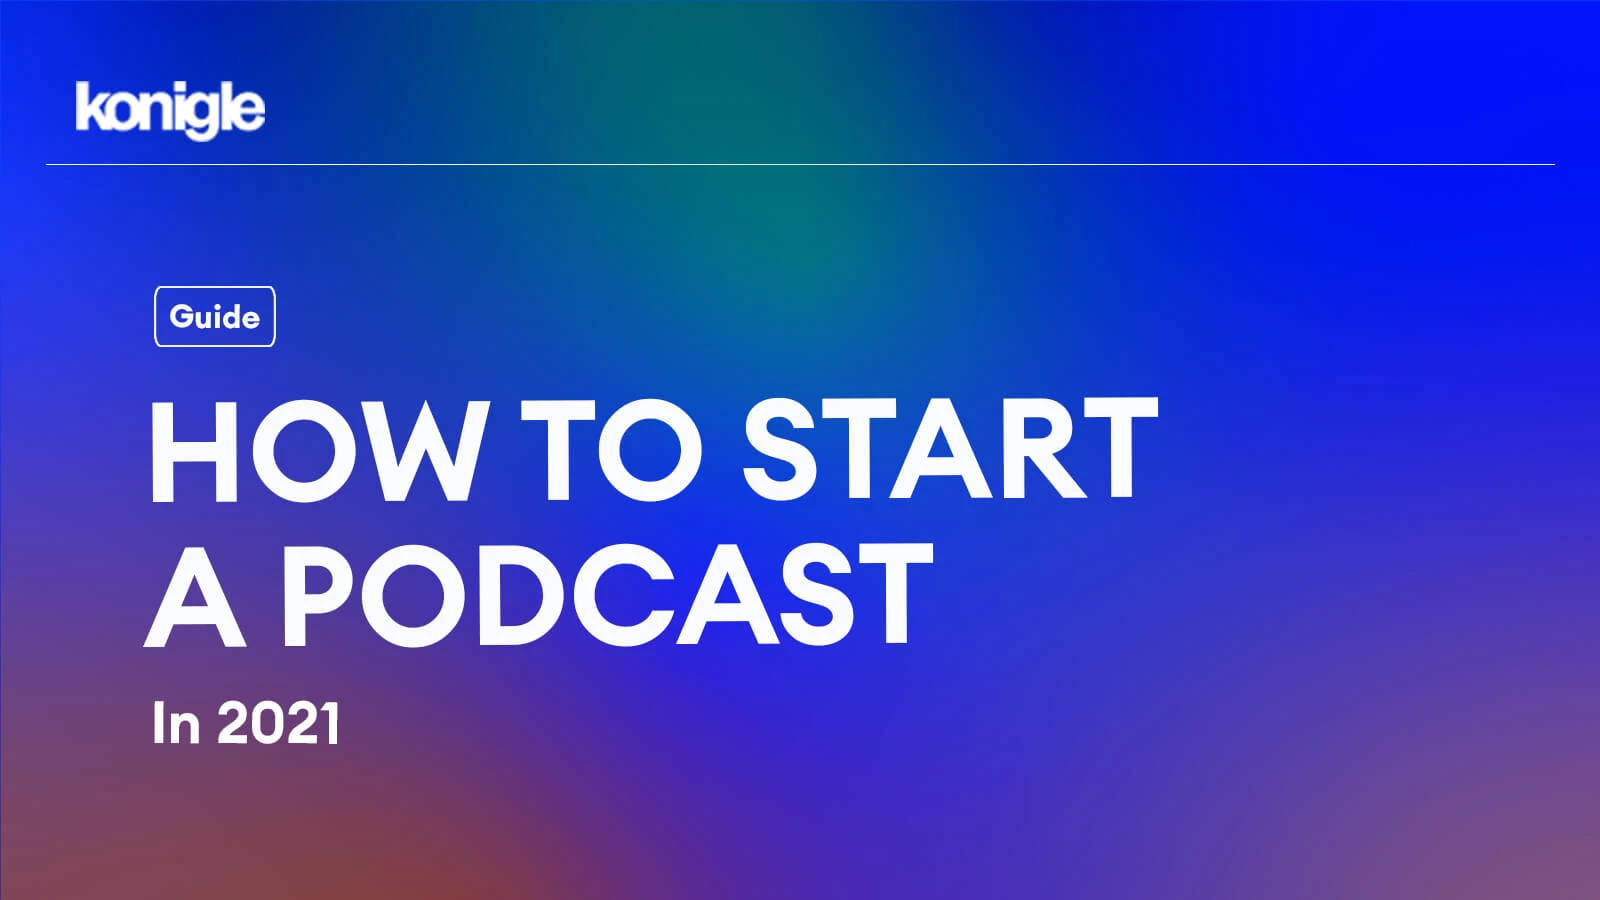 How to start a podcast in 2021